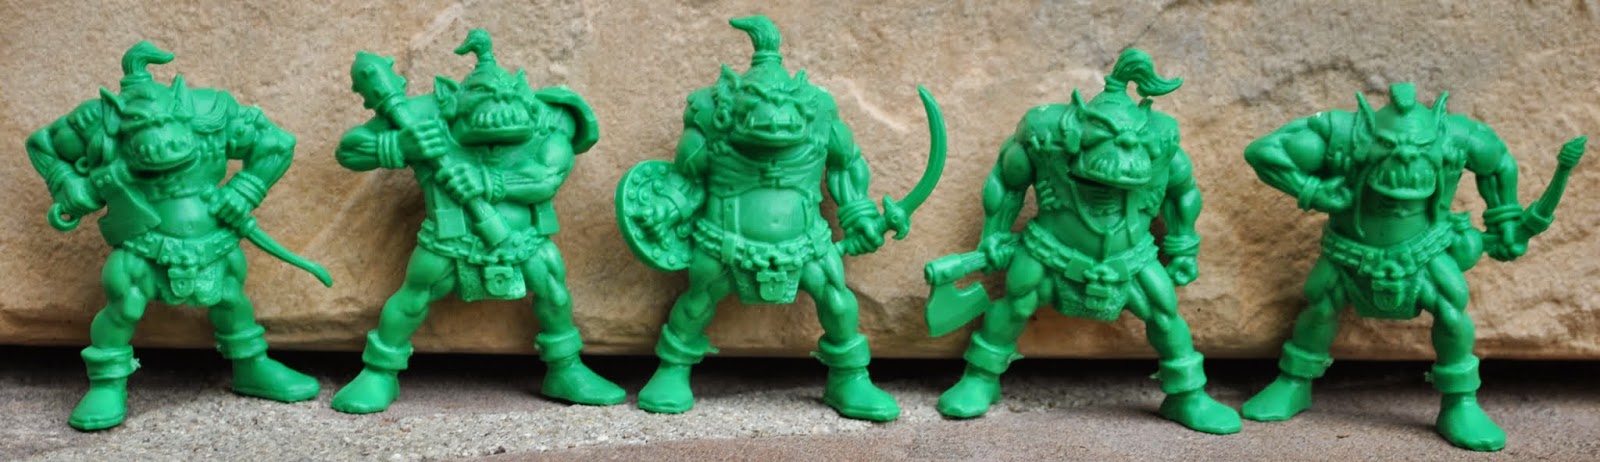 Details about   Set of 4 Mini Barbarians Plastic Fantasy Toy Soldier 30-35 mm Figures TEHNOLOG 